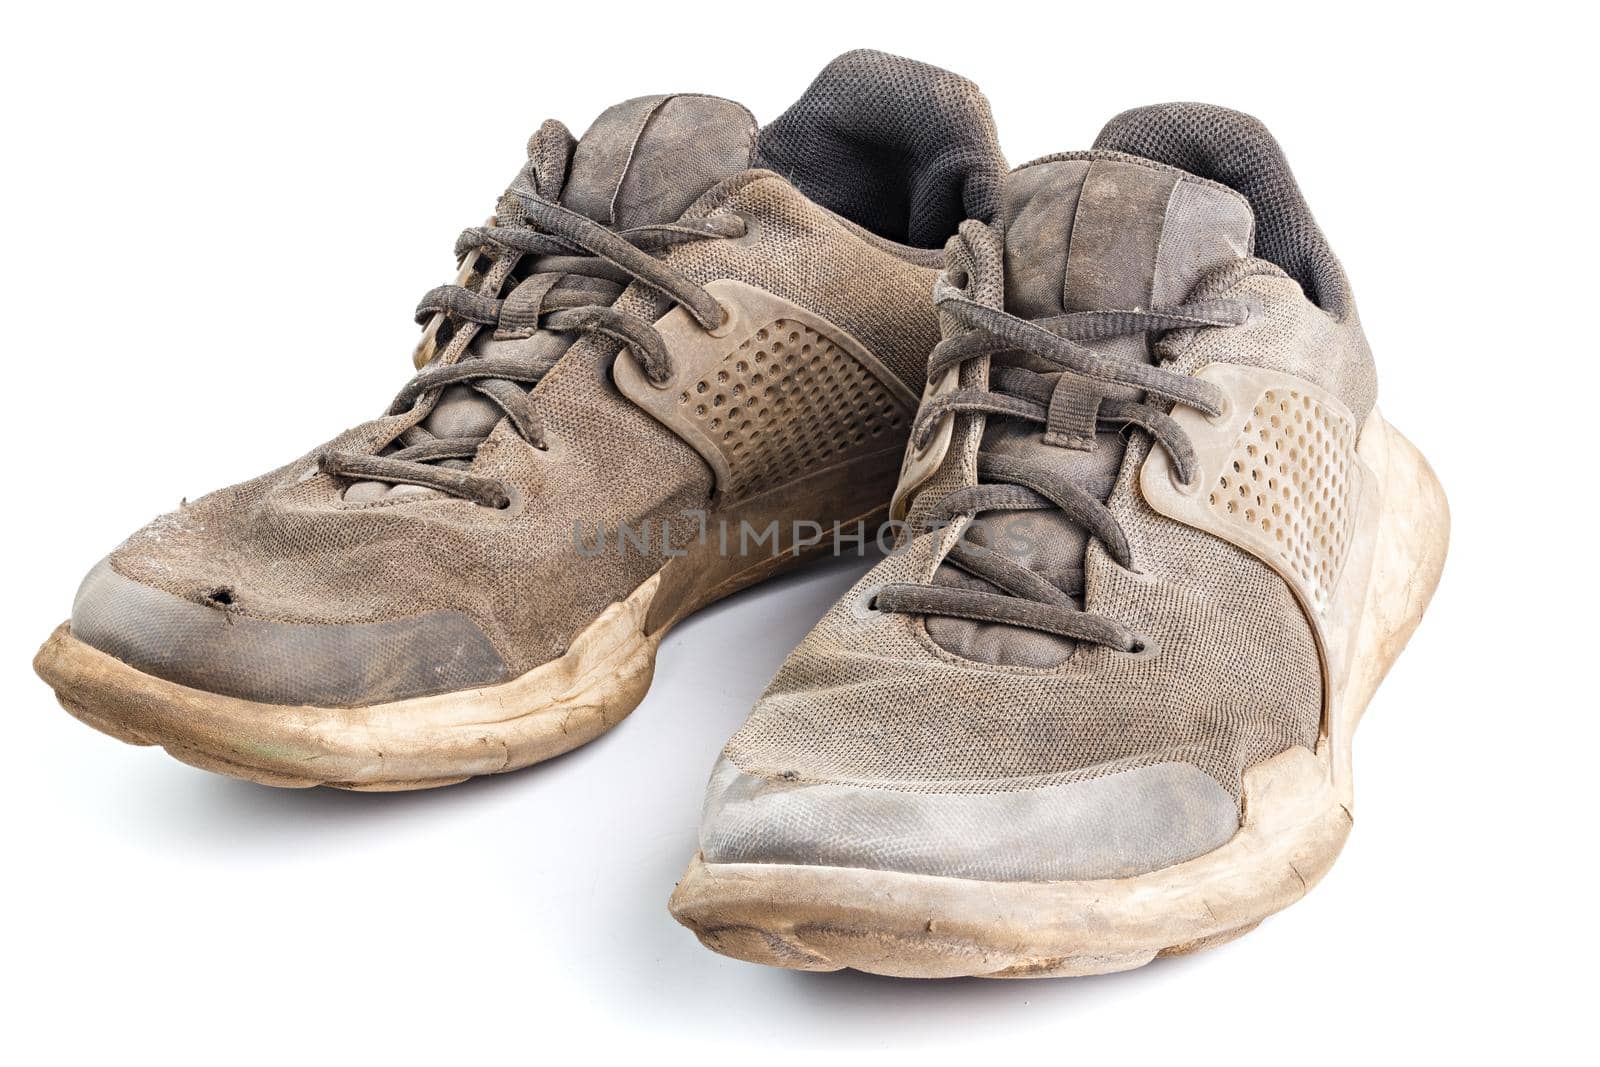 a pair of weared dirty sneakers isolated on white background, edge-to-edge sharpness